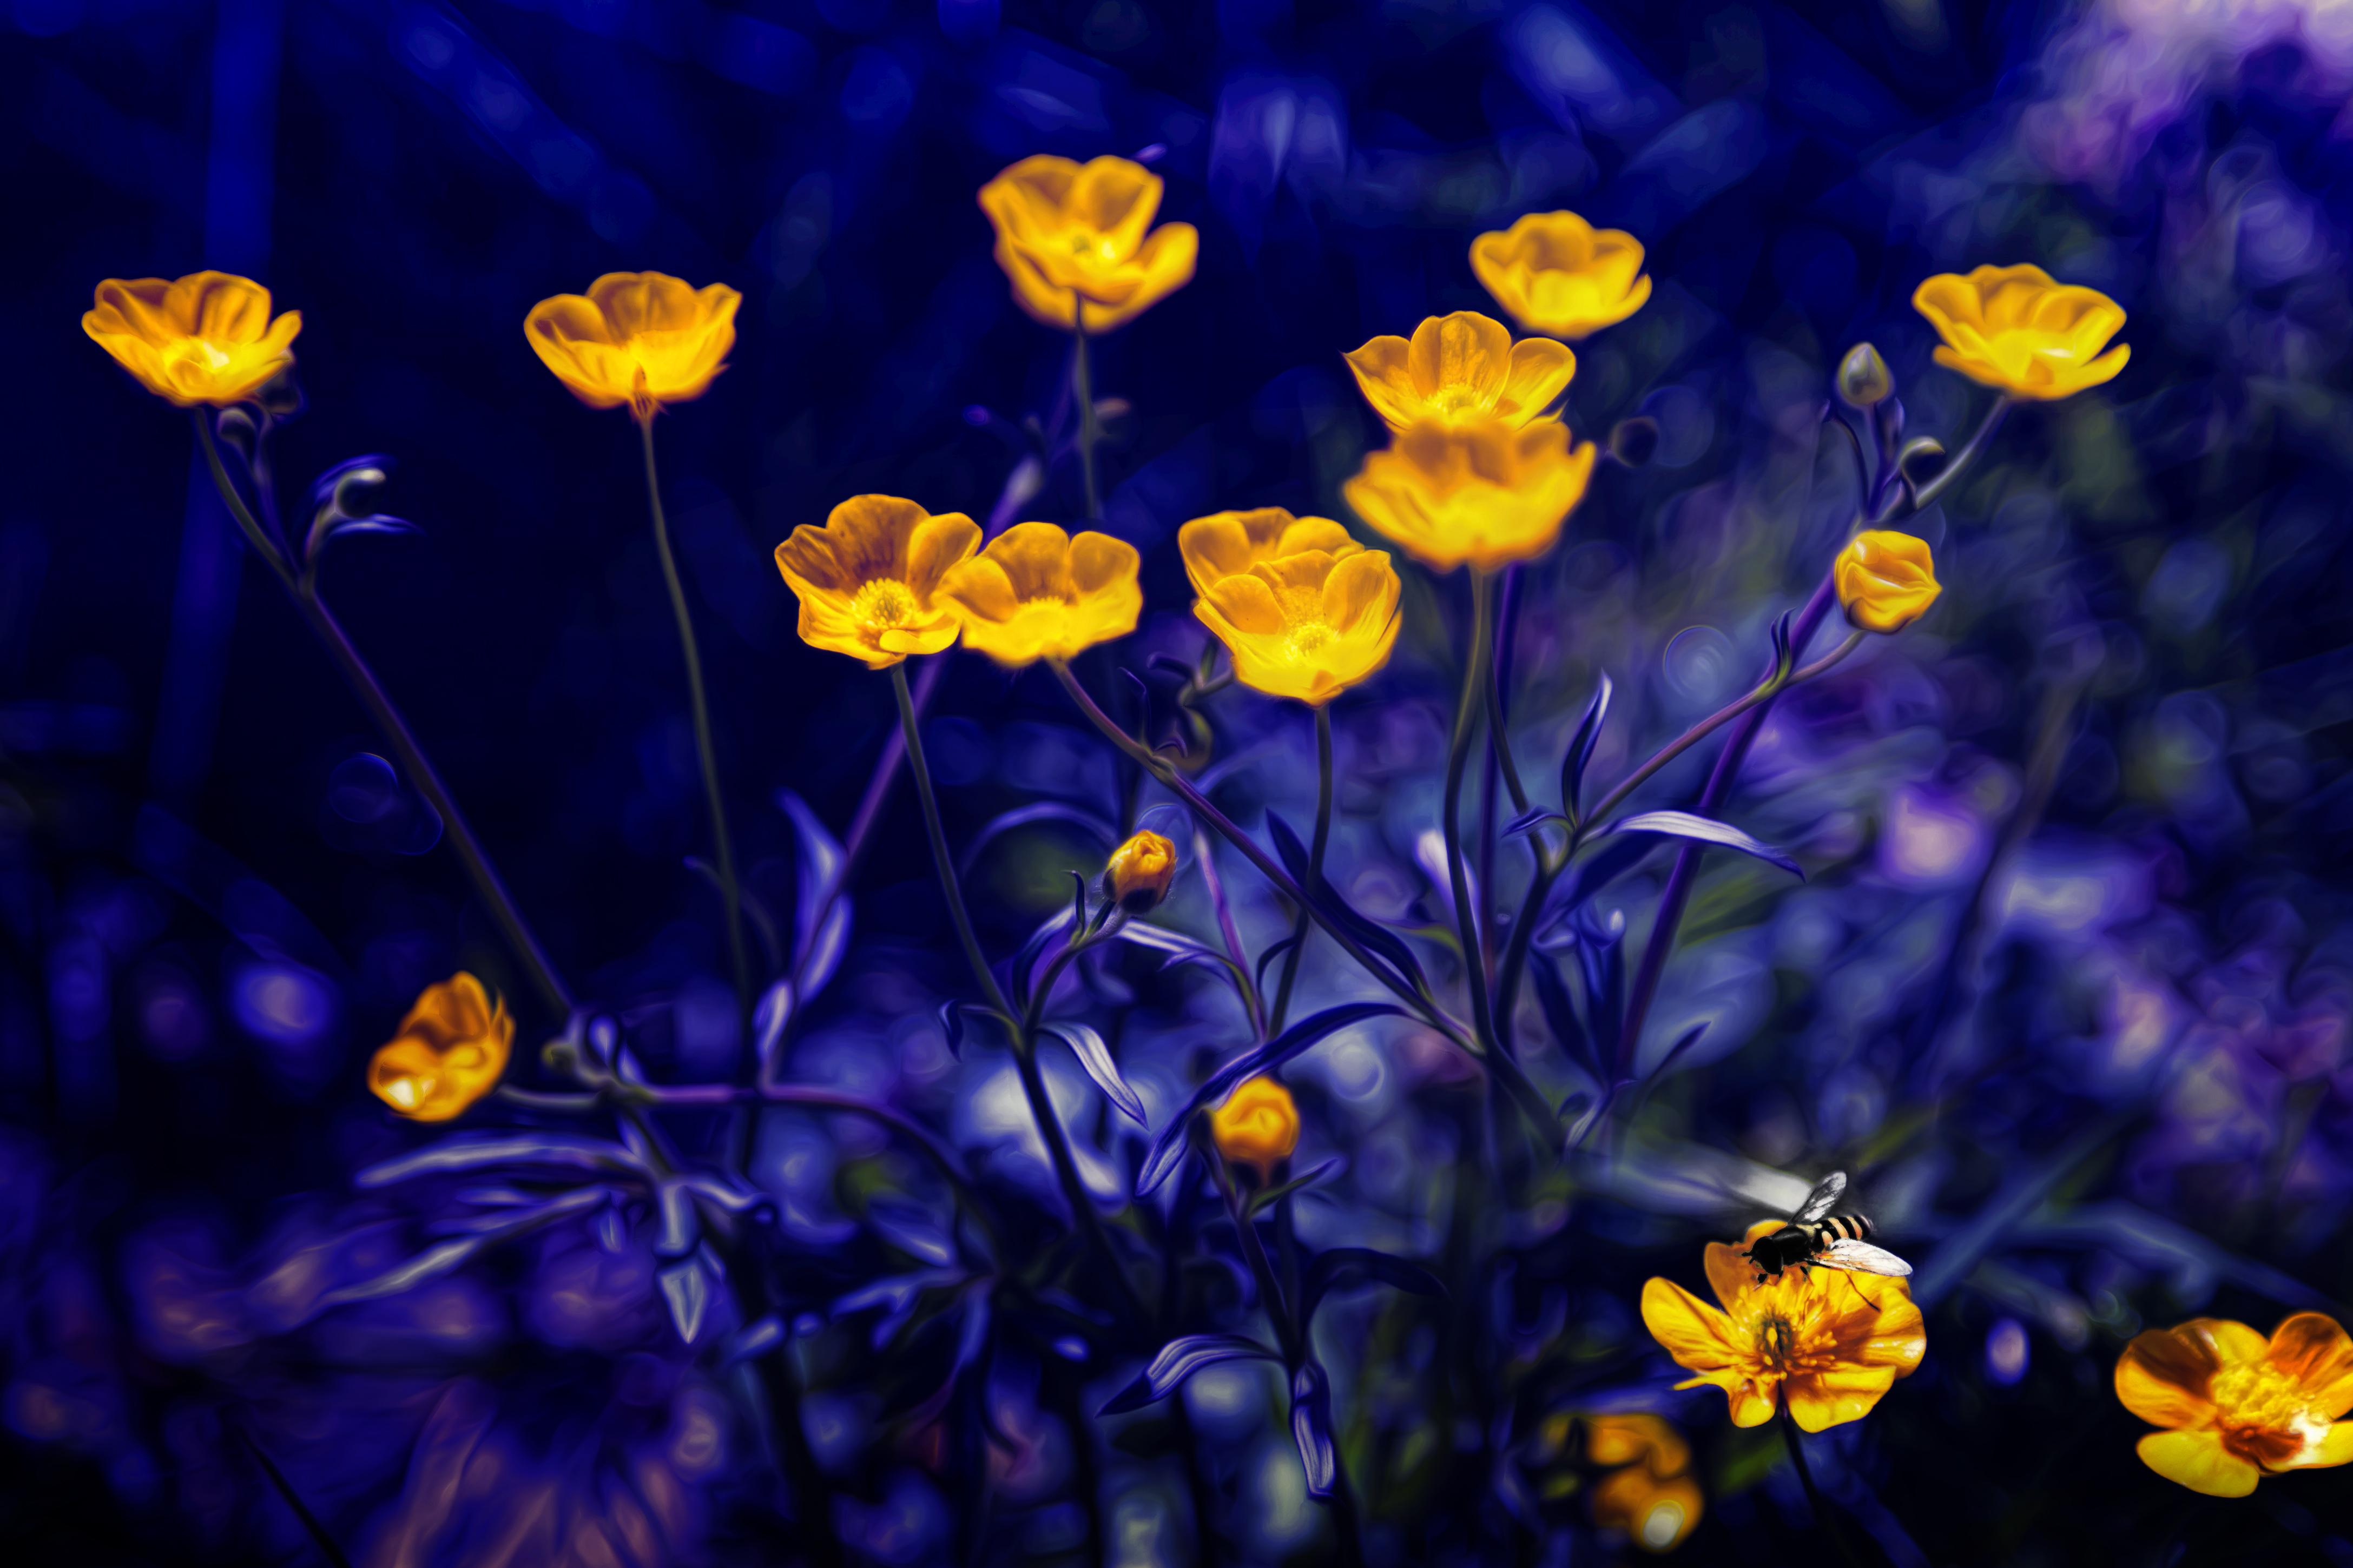 Glowing Buttercups by Chris Frank